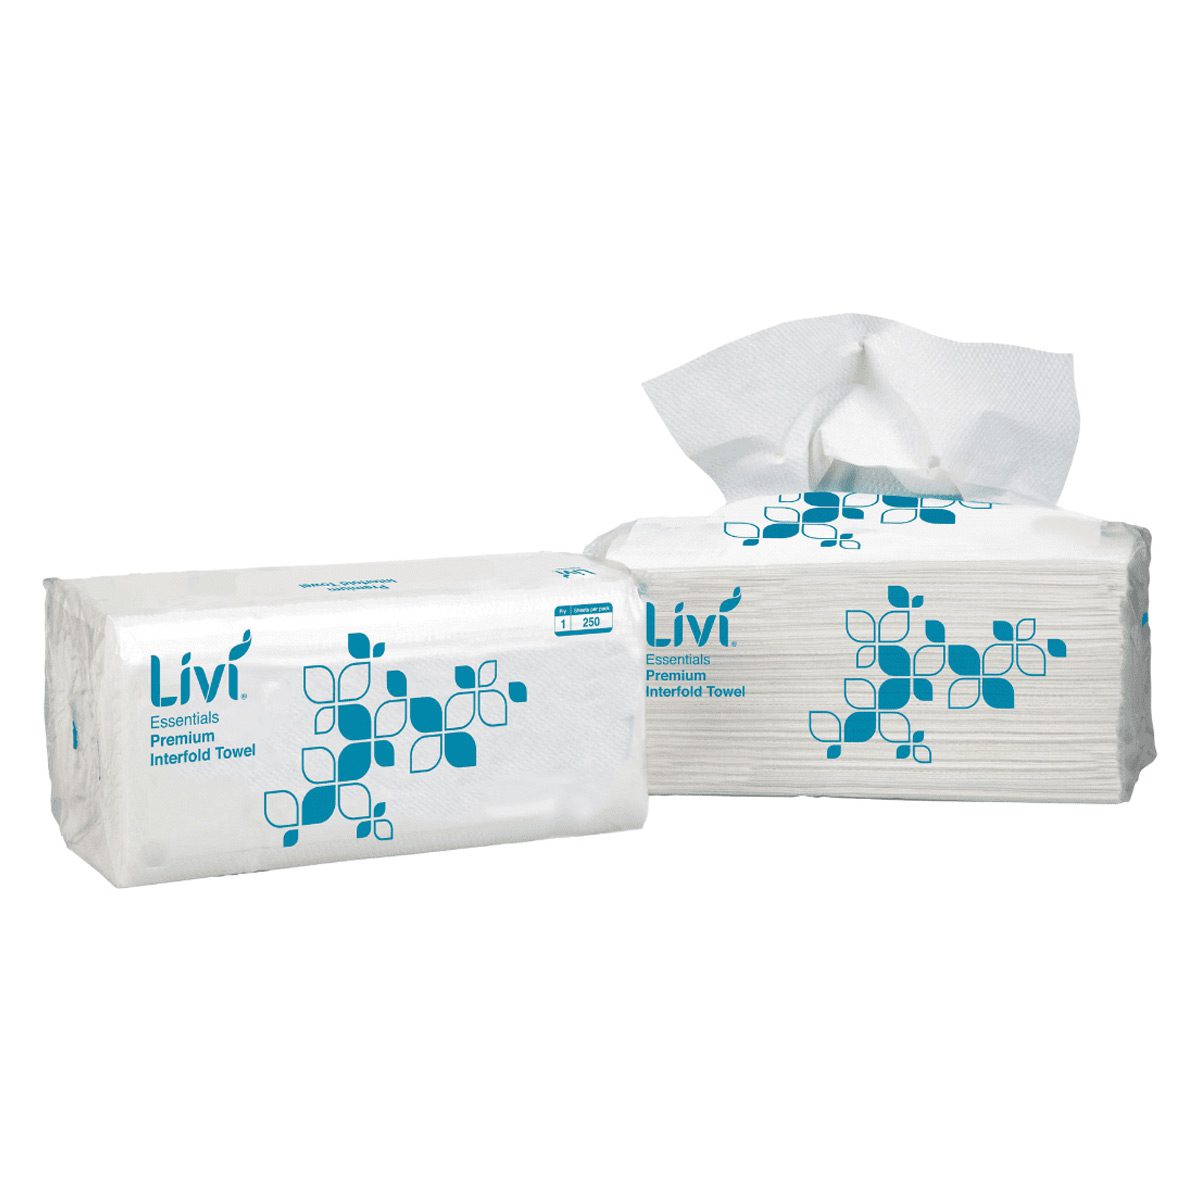 paper-products-paper-towels-livi-white-interfold-paper-towels-wider-towel-unique-dispenser-handy-sealed-hygienic-packet-can-also-be-dispensed-vjs-distributors-1421